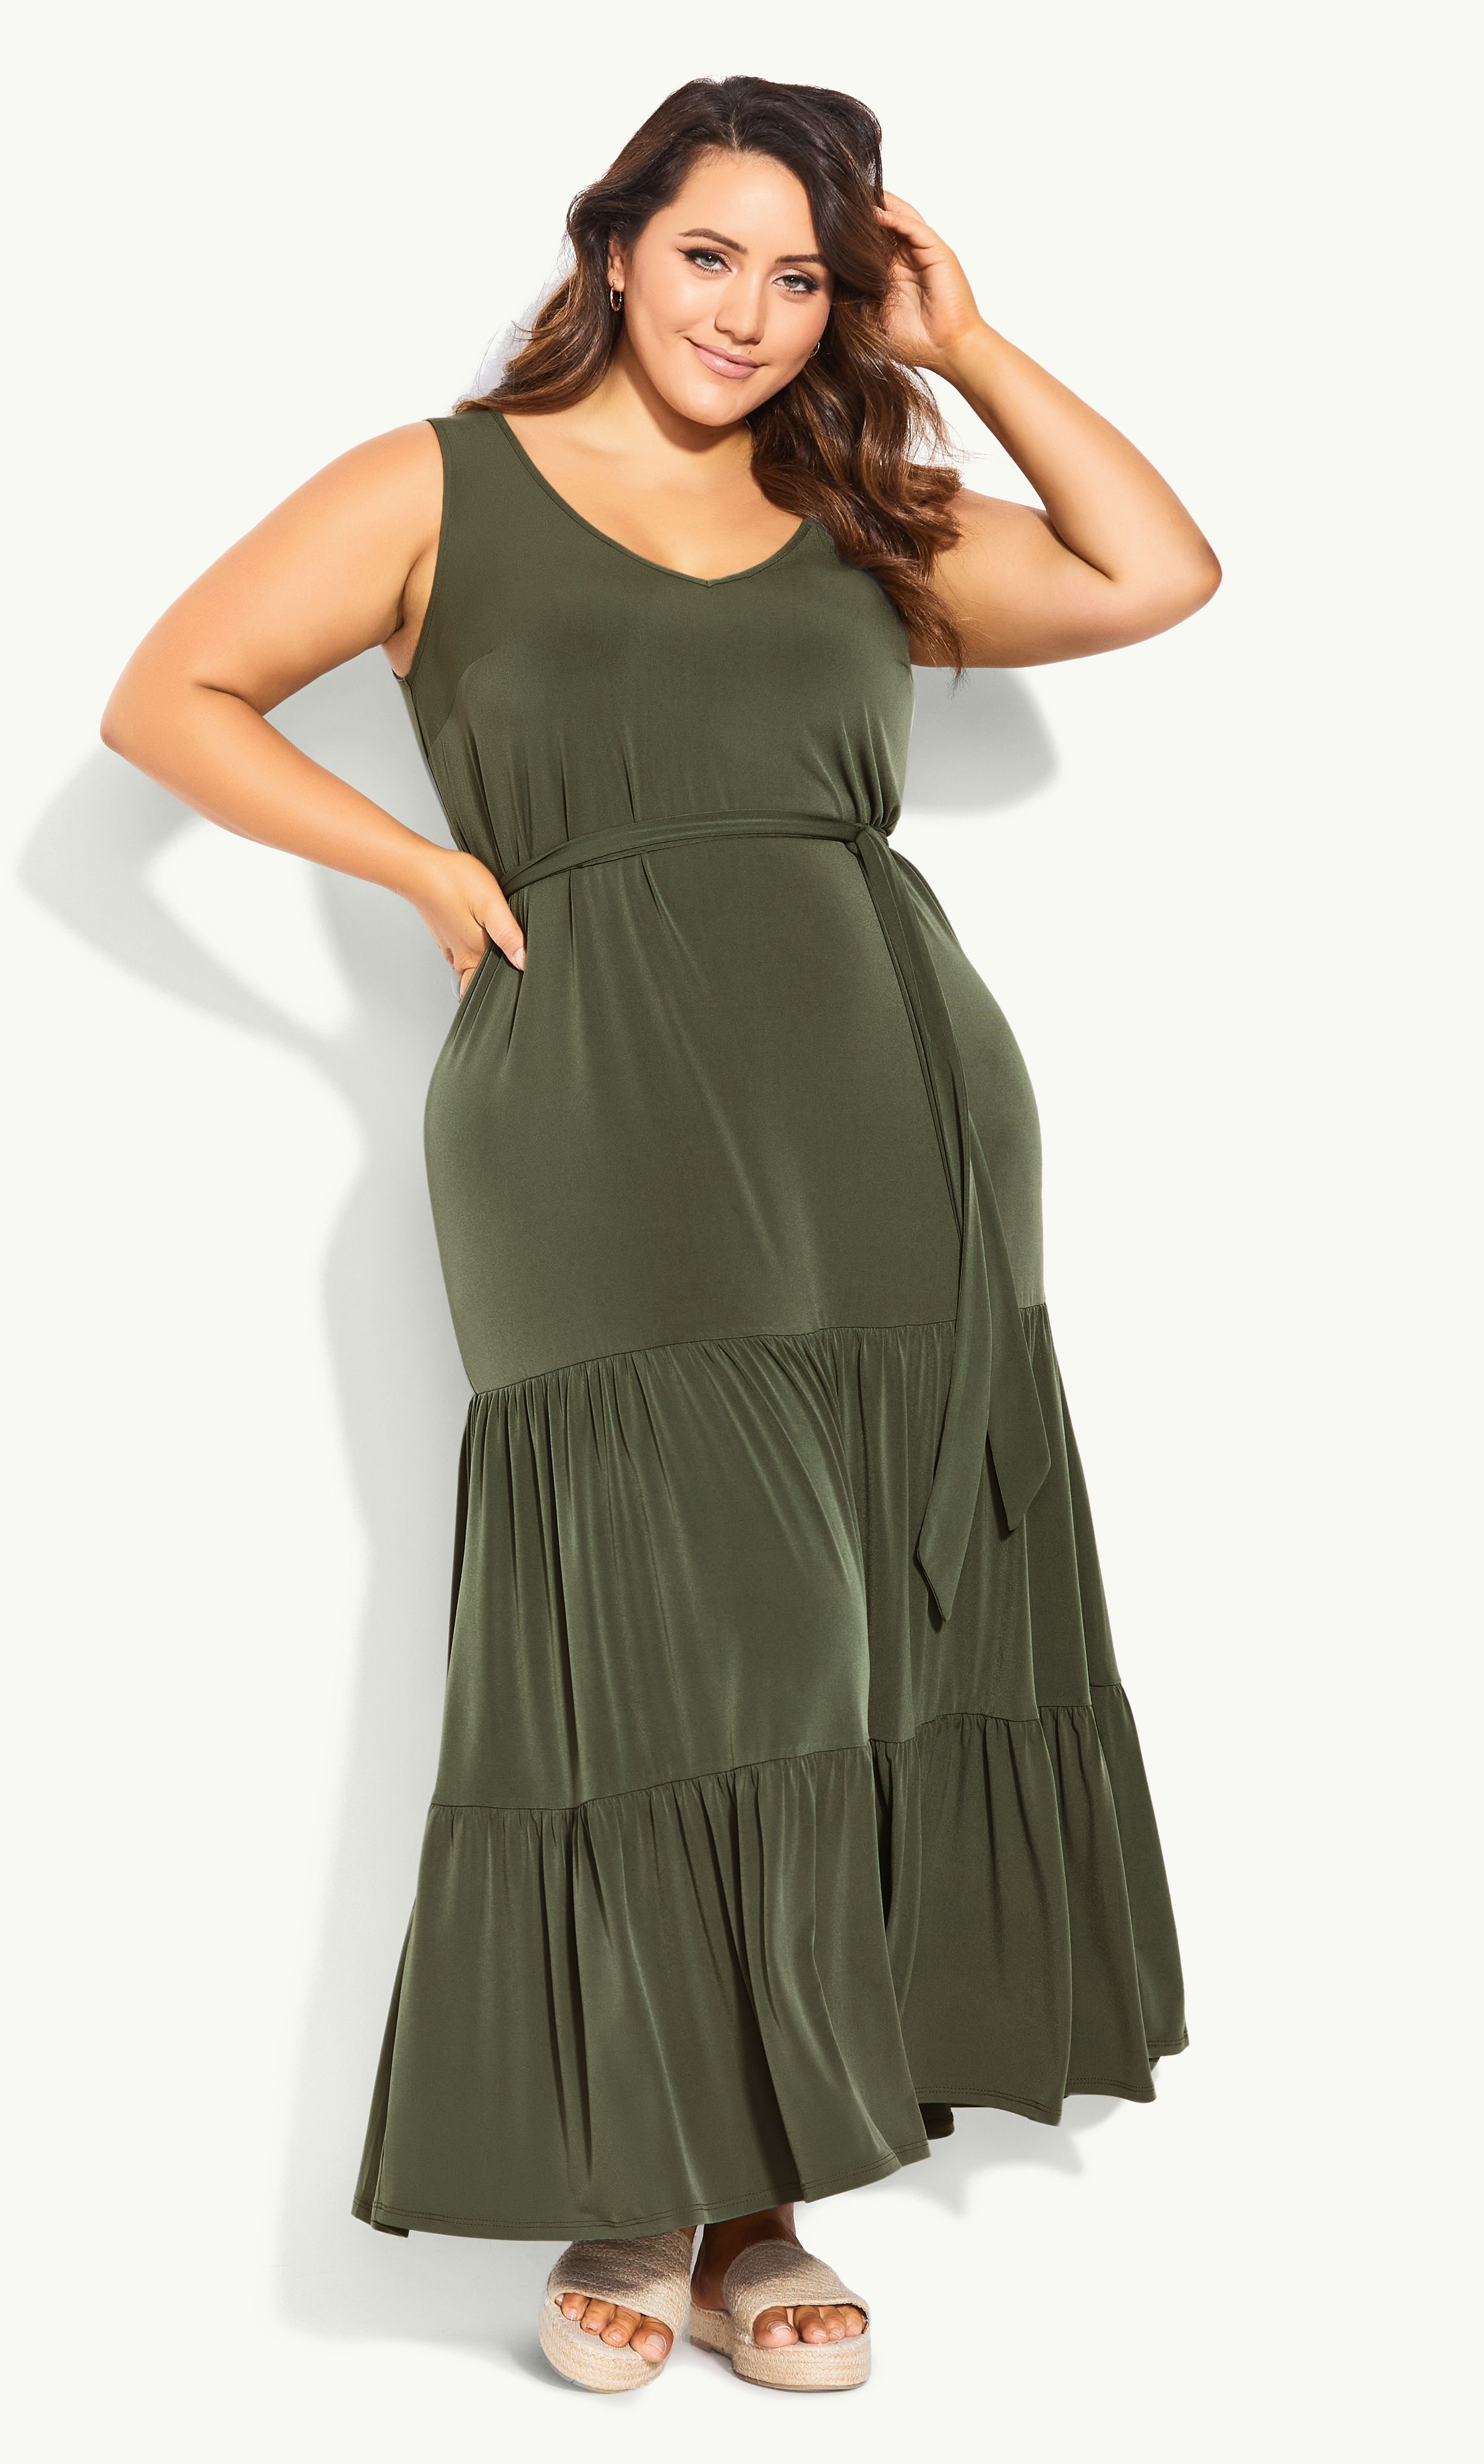 Boasting a trending khaki hue, the Tiered Sleeveless Maxi Dress is bound to become your summer go-to. It features a classic V-neckline and sleeveless cut, with a draping tiered hemline that floats ever so elegantly in motion. Key Features Include: - V-neckline - Sleeveless - Self-tie fabric waist belt - Pull over style - Relaxed fit - Unlined - Maxi length - Ruffle tiered hemline Tie up your look with tan-hued sandals, a pair of cat-eye sunglasses and a chic rattan bag. Summery perfection!